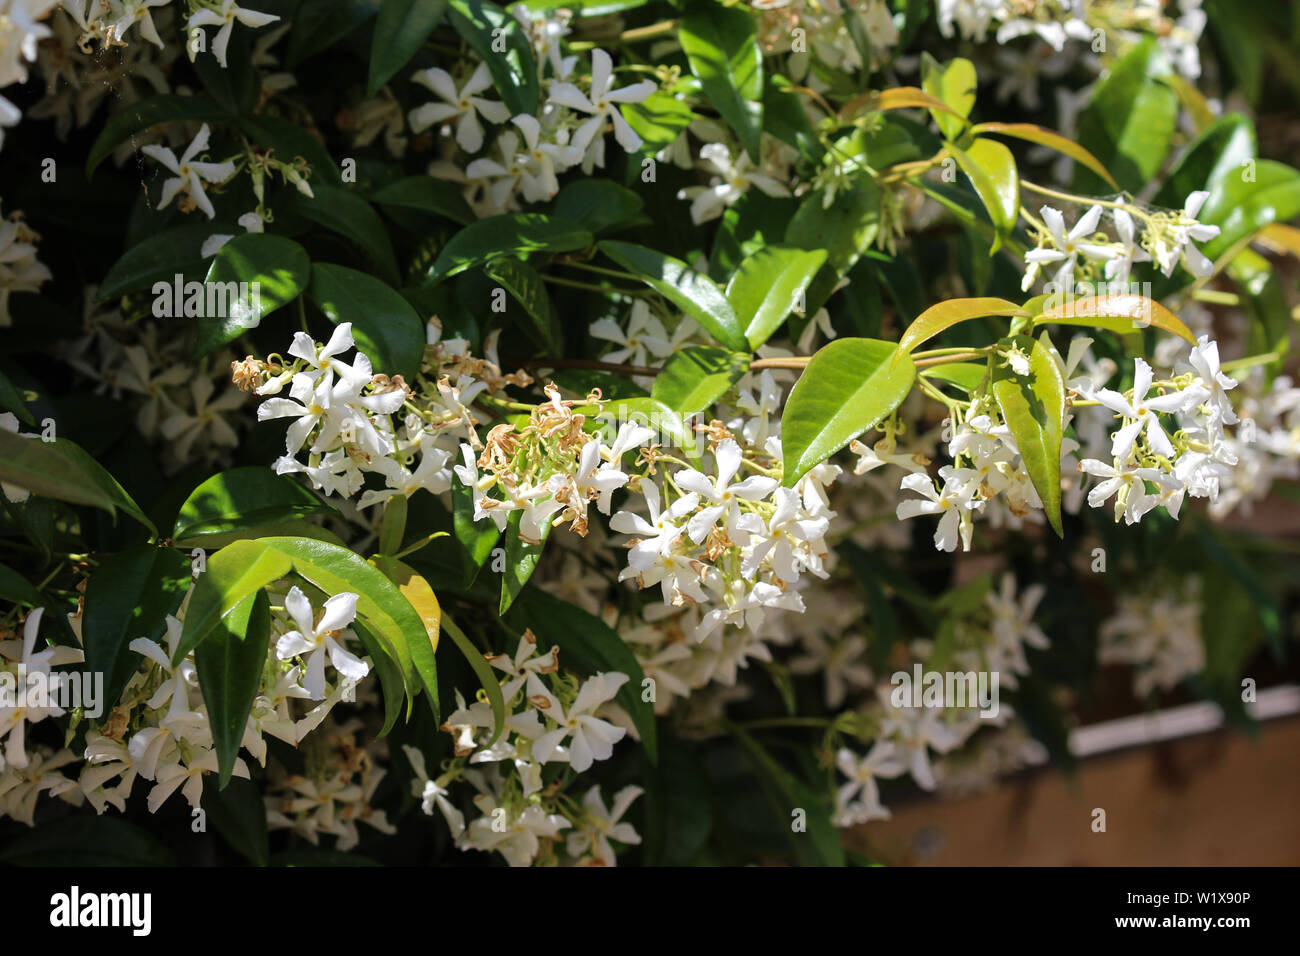 close up of Trachelospermum jasminoides, Common names include confederate jasmine, southern jasmine, star jasmine, confederate jessamine, and Chinese Stock Photo